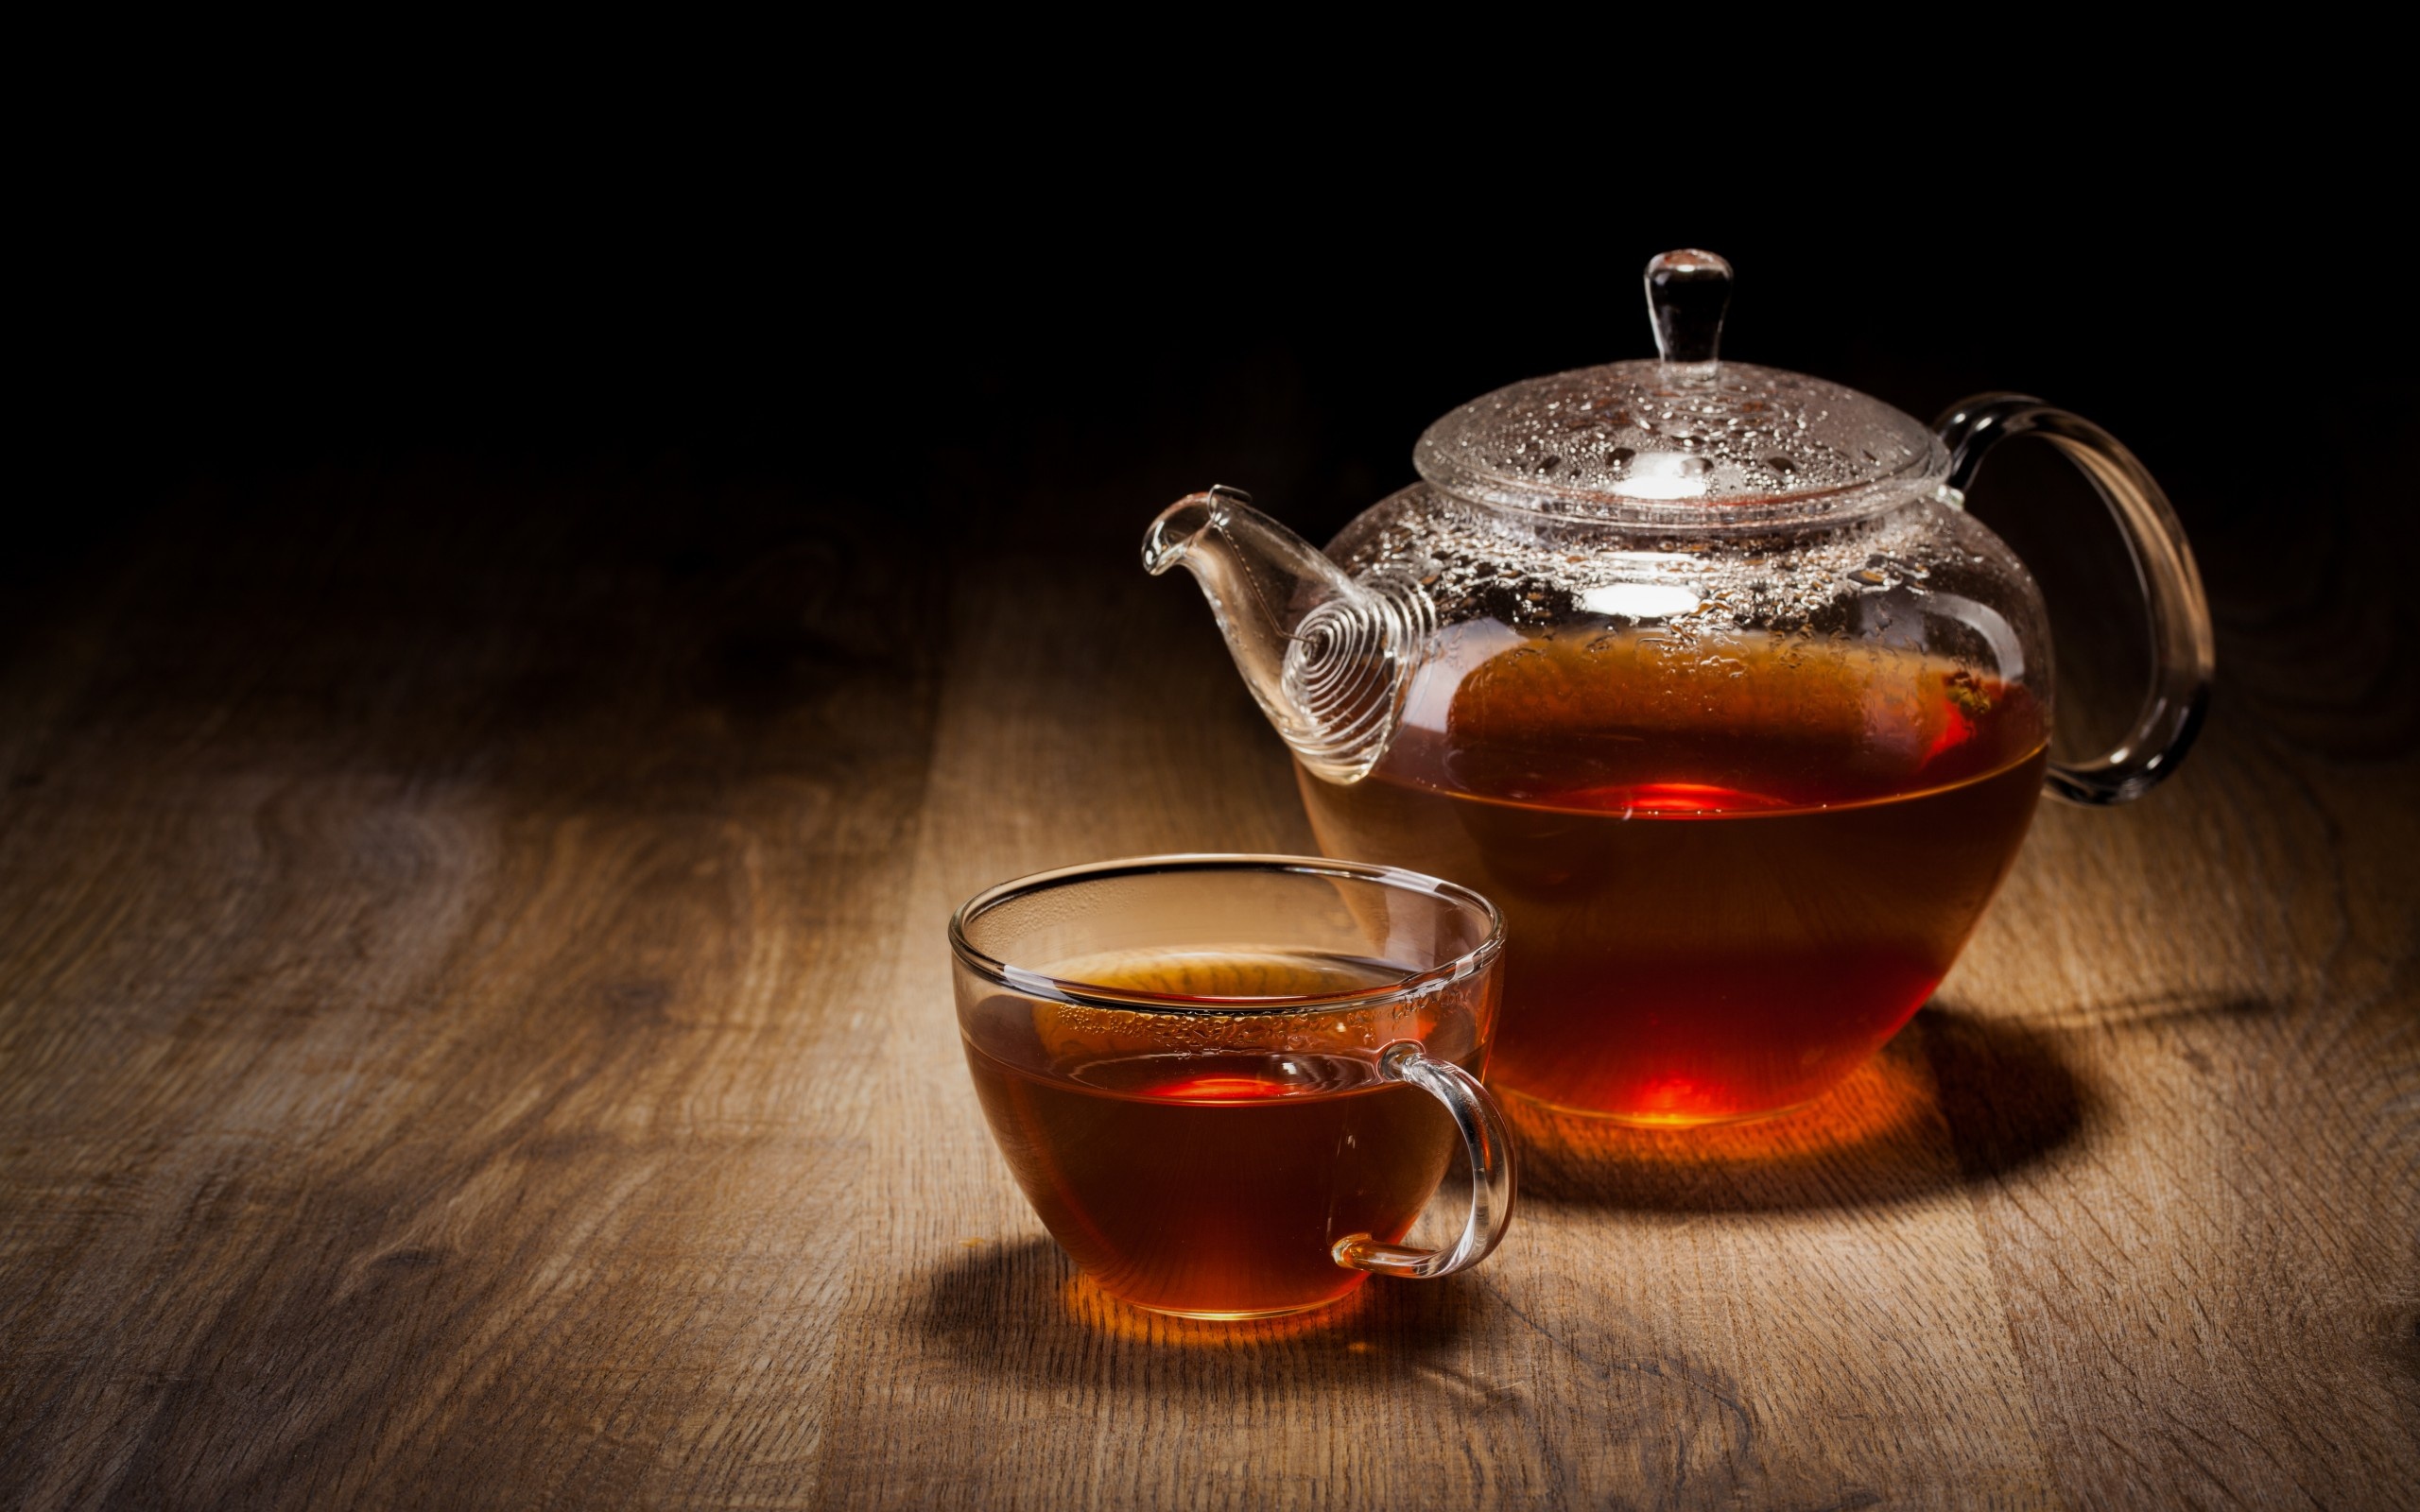 Tea: The second most widely consumed beverage in the world after water. 2560x1600 HD Wallpaper.